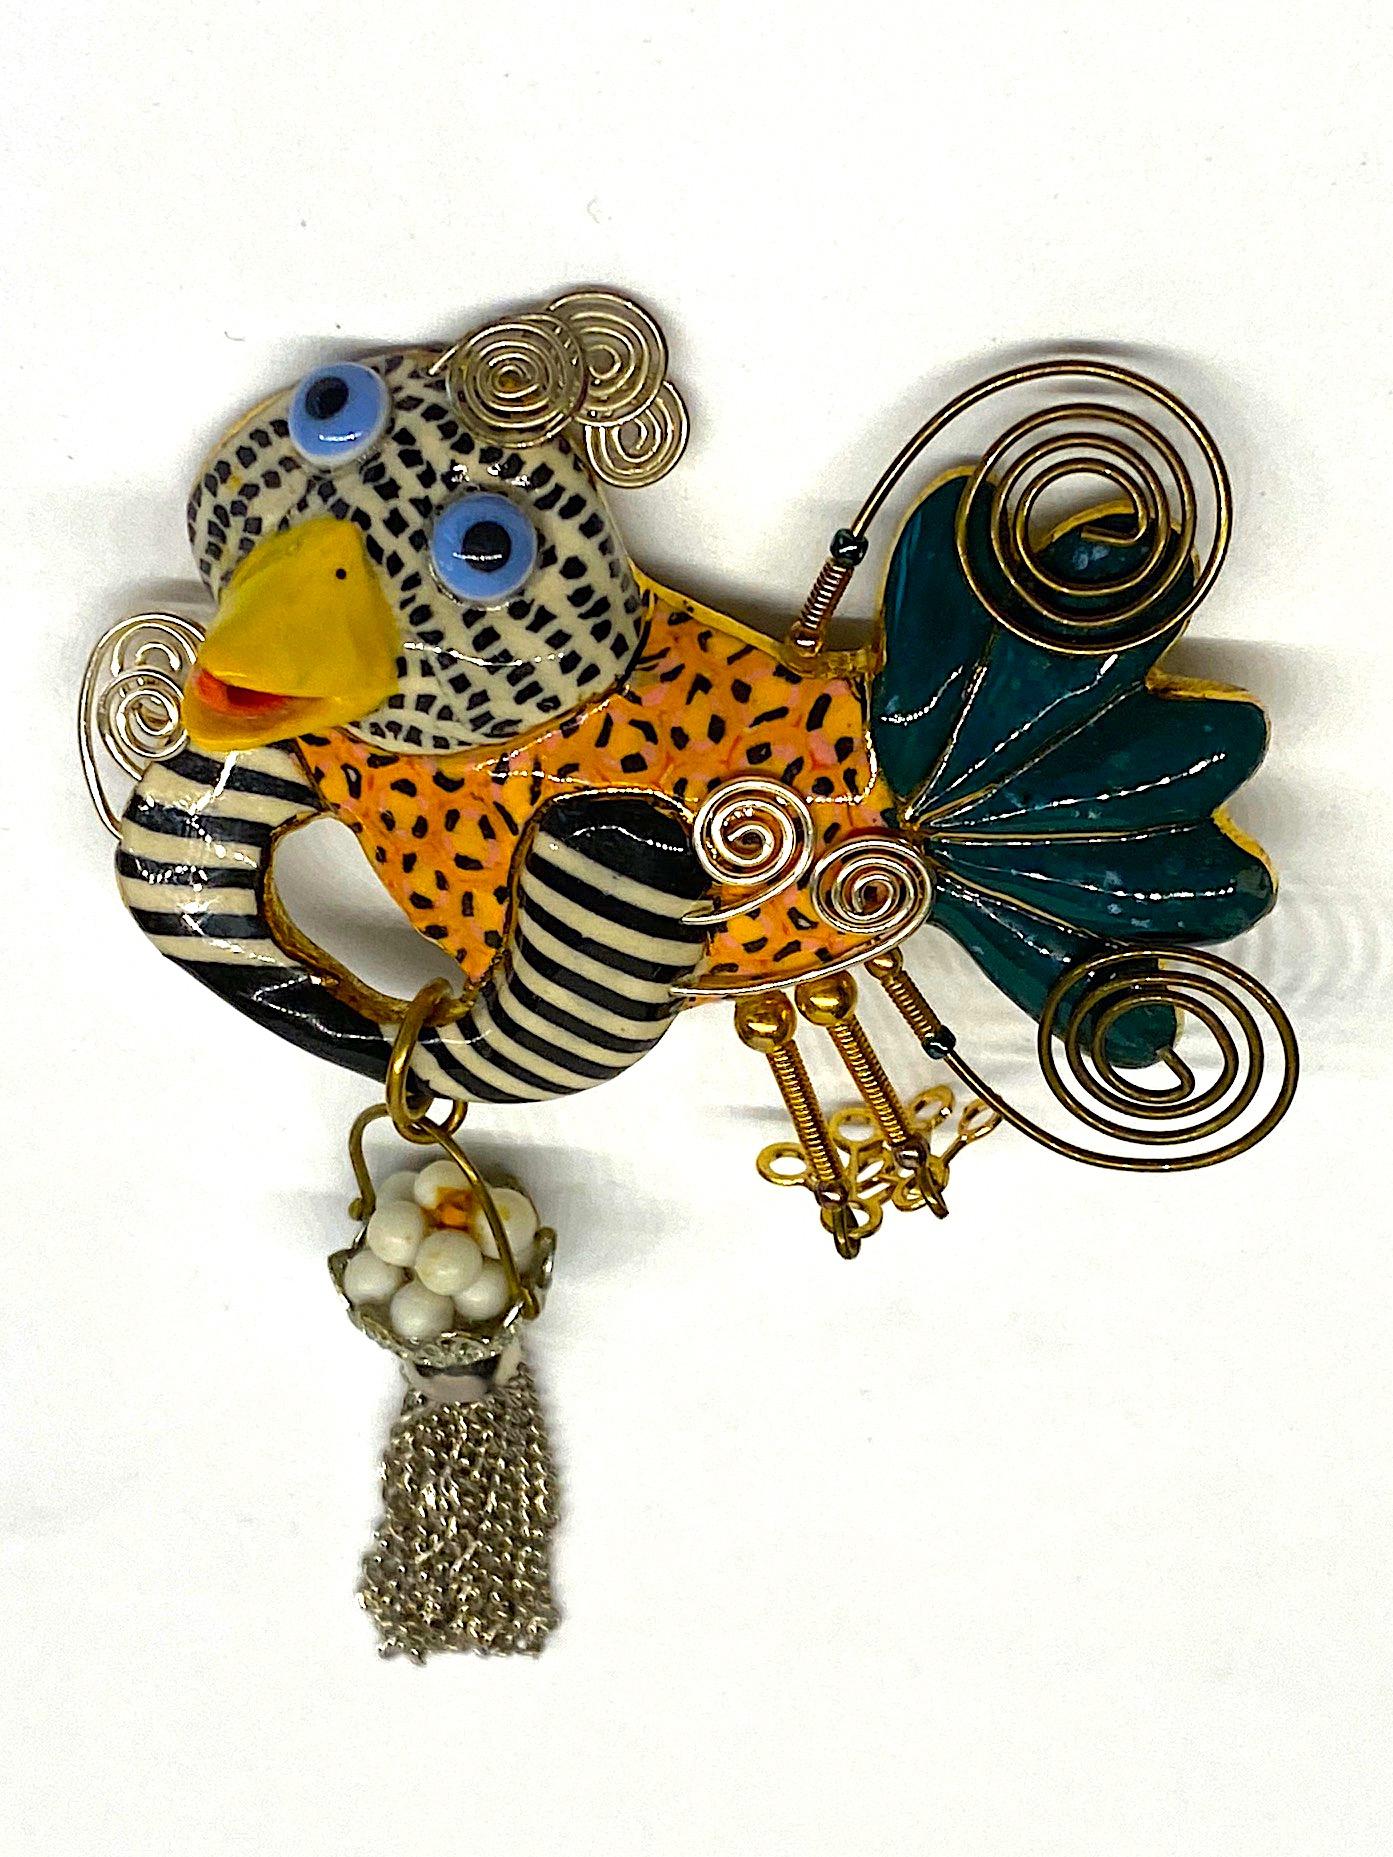 Always with a sense of whimsy, Jewelry 10 pieces designed by Cynthia Chuang and her husband Erh-Ping Tsai are highly collected and displayed. This is a one of kind hand made brooch of a chicken with basket full of eggs from the company Jewelry 10. 